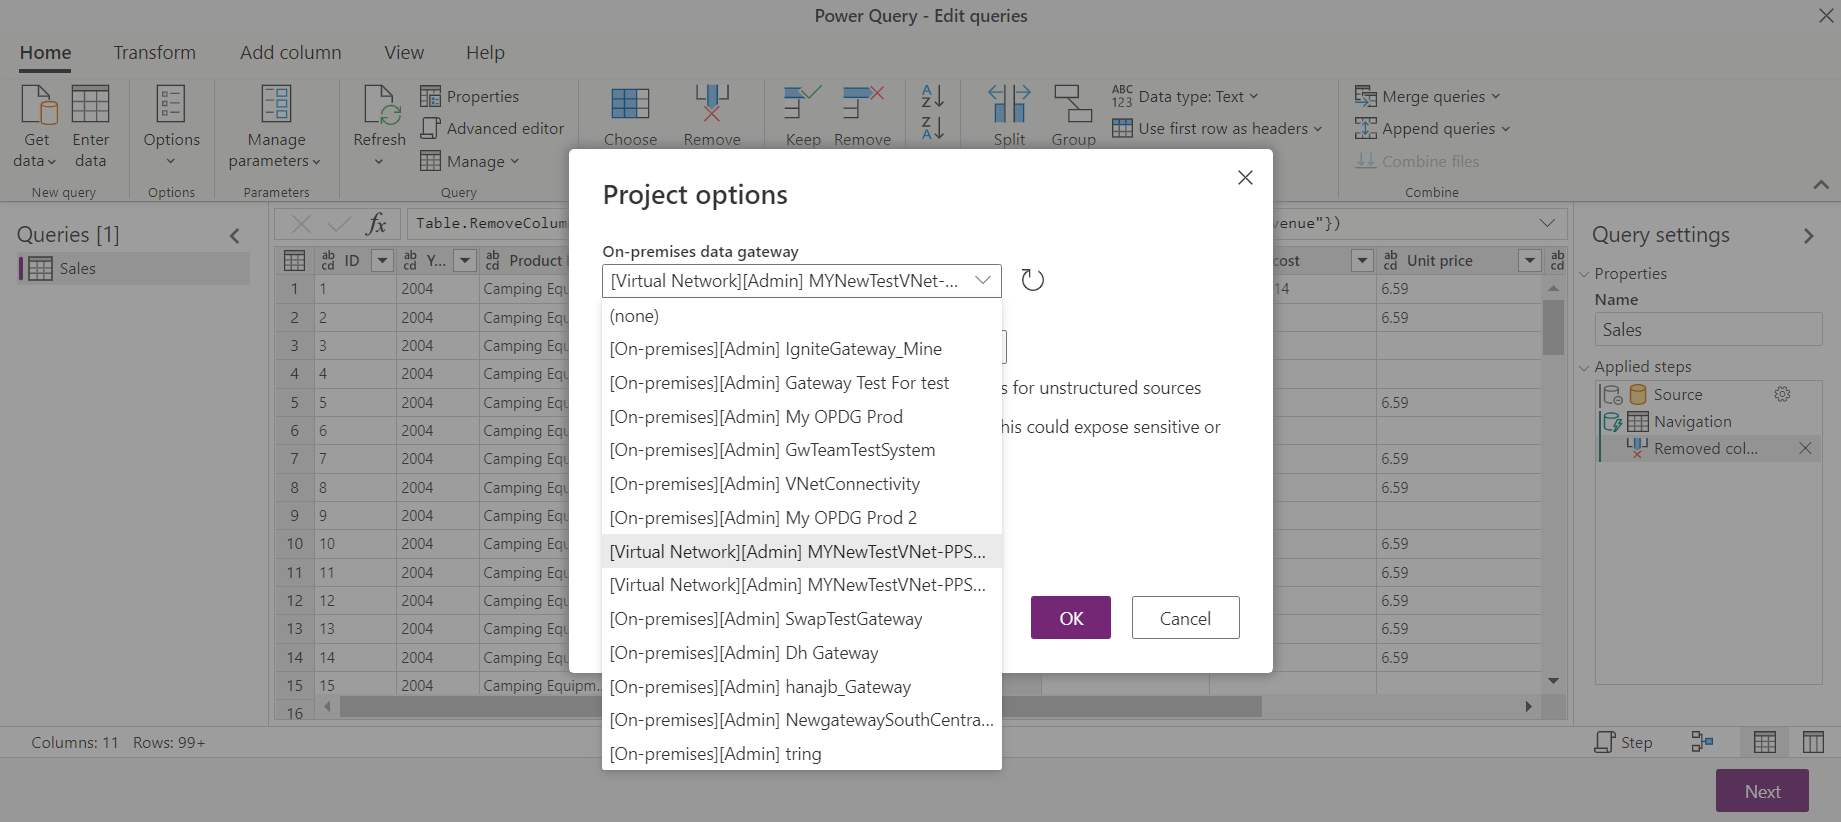 Screenshot showing the Power Query Project options dialog box that contains the VNet data gateway options you can change while editing your dataflow.